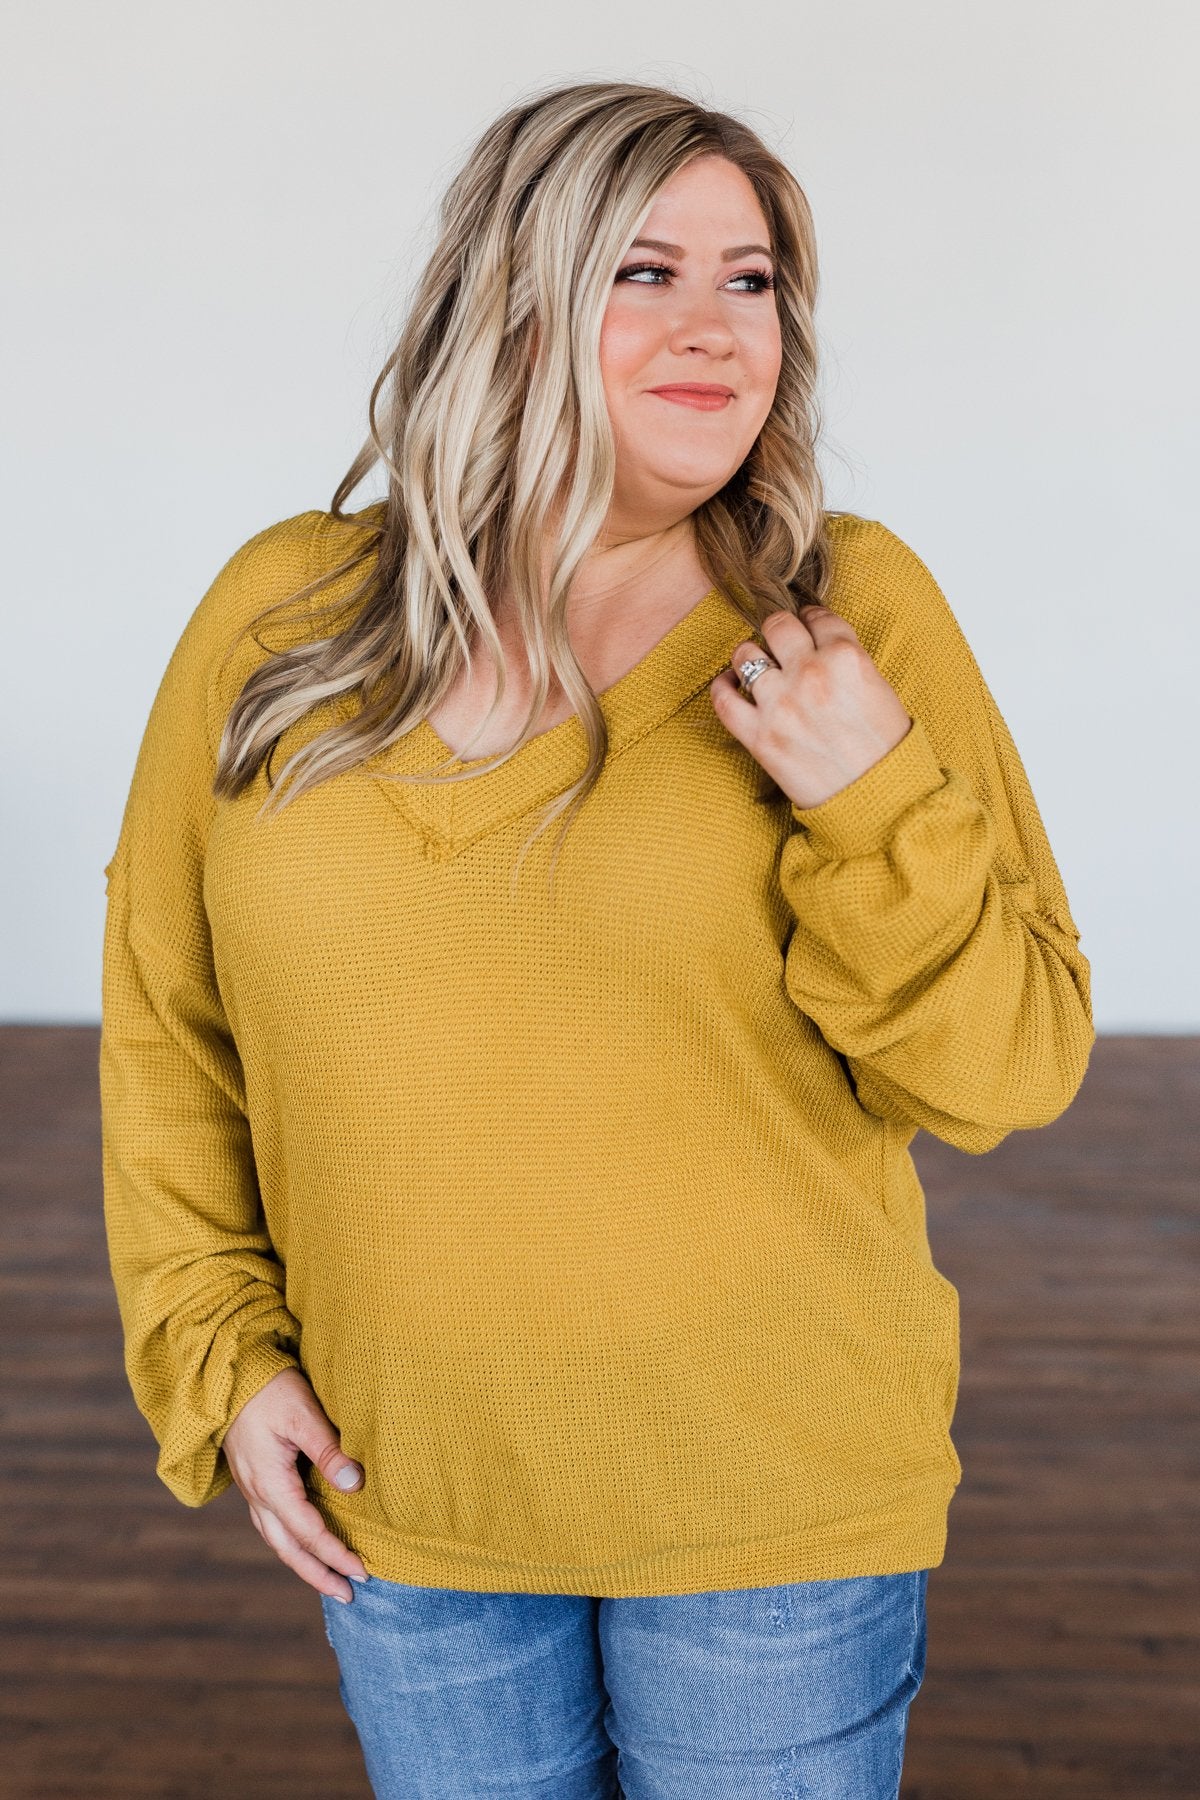 Know You Better Thermal Long Sleeve Top- Mustard – The Pulse Boutique